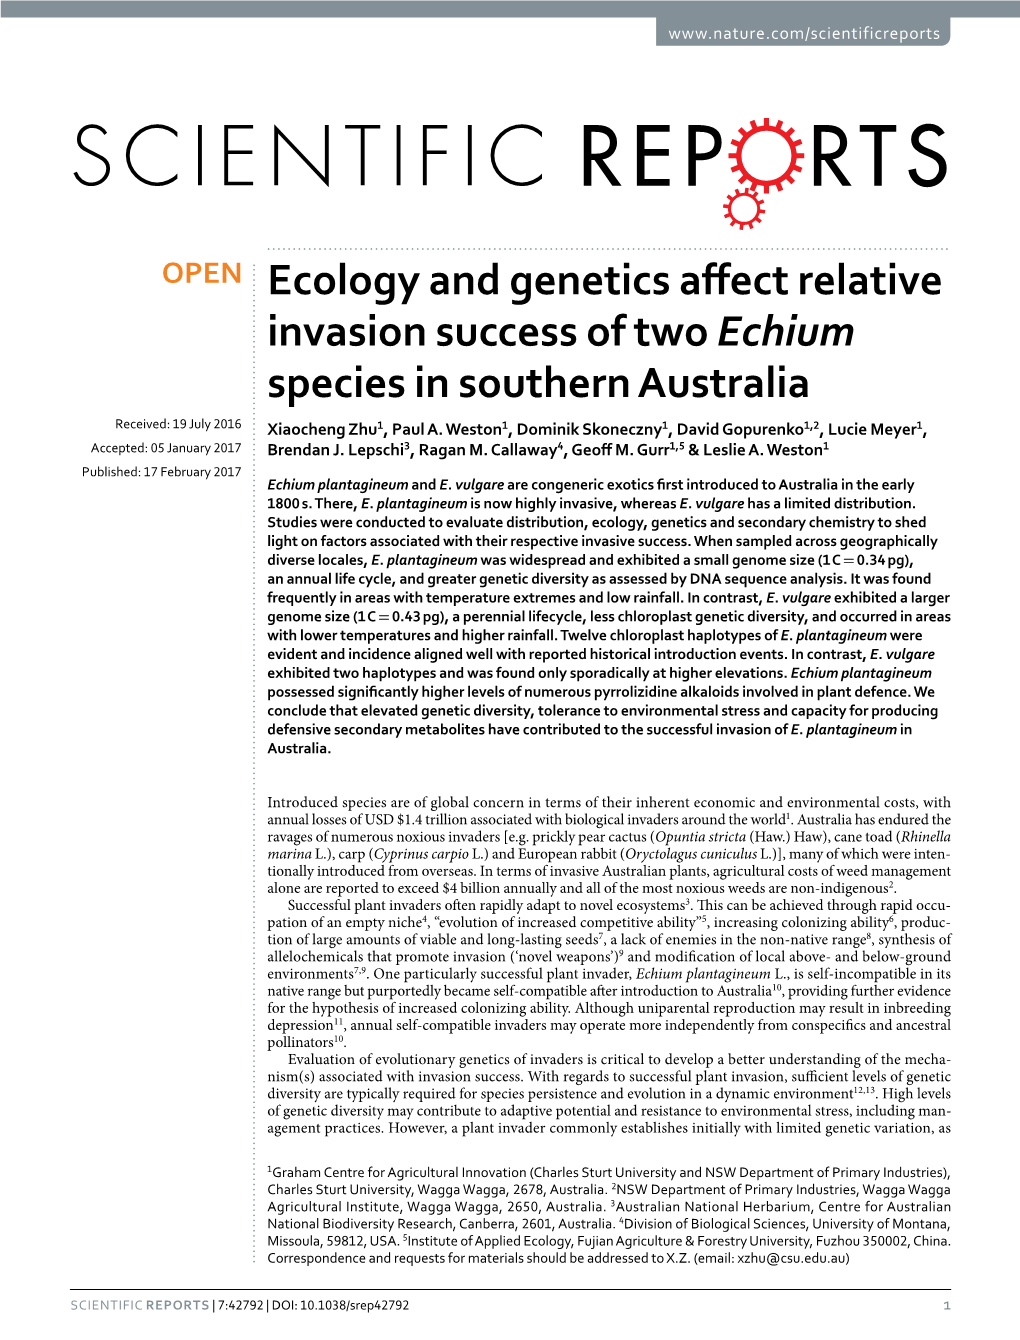 Ecology and Genetics Affect Relative Invasion Success of Two Echium Species in Southern Australia Received: 19 July 2016 Xiaocheng Zhu1, Paul A